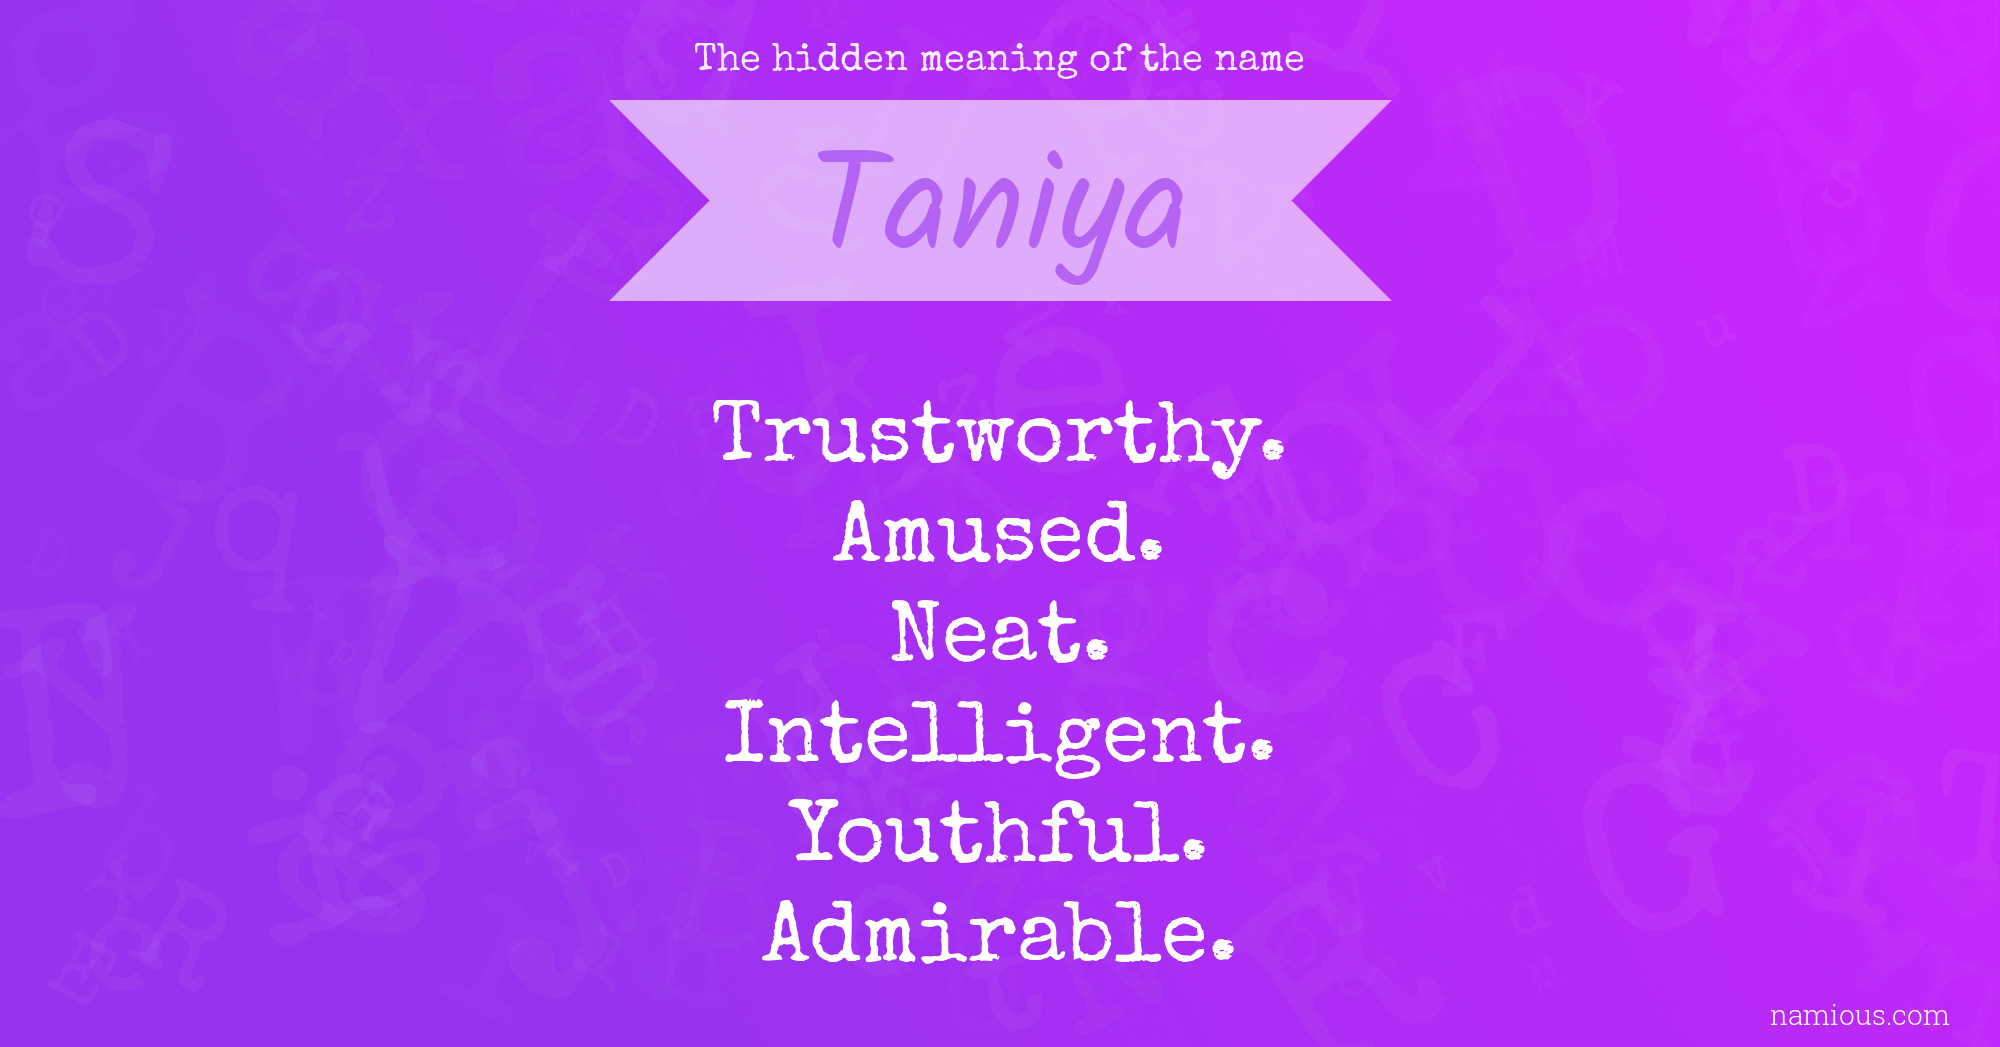 The hidden meaning of the name Taniya